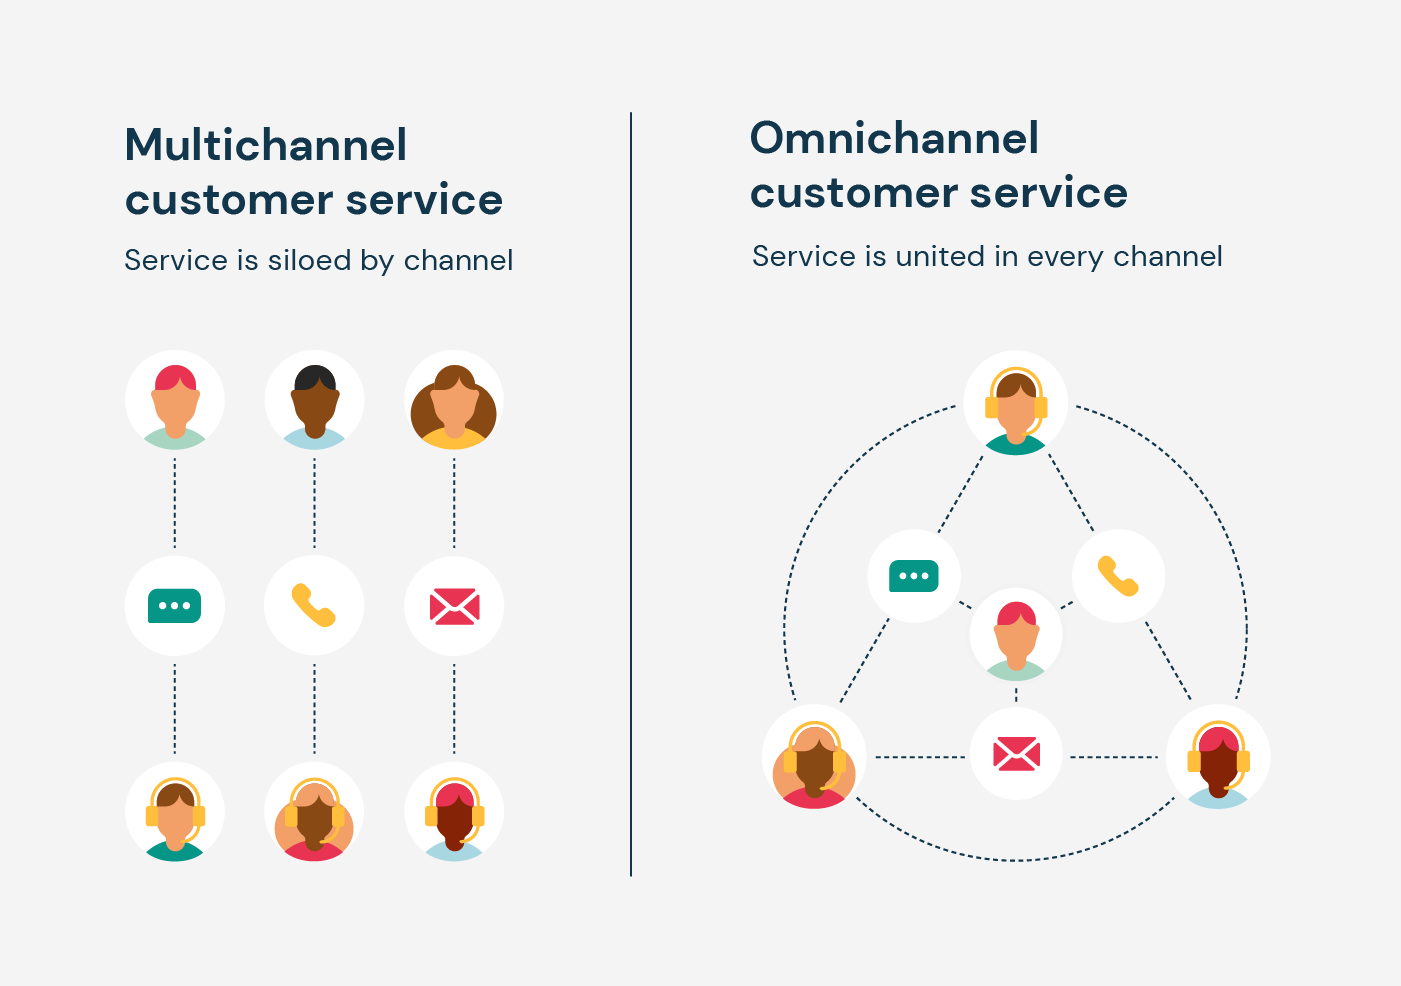 Illustration shows the differences between multichannel and omnichannel customer service